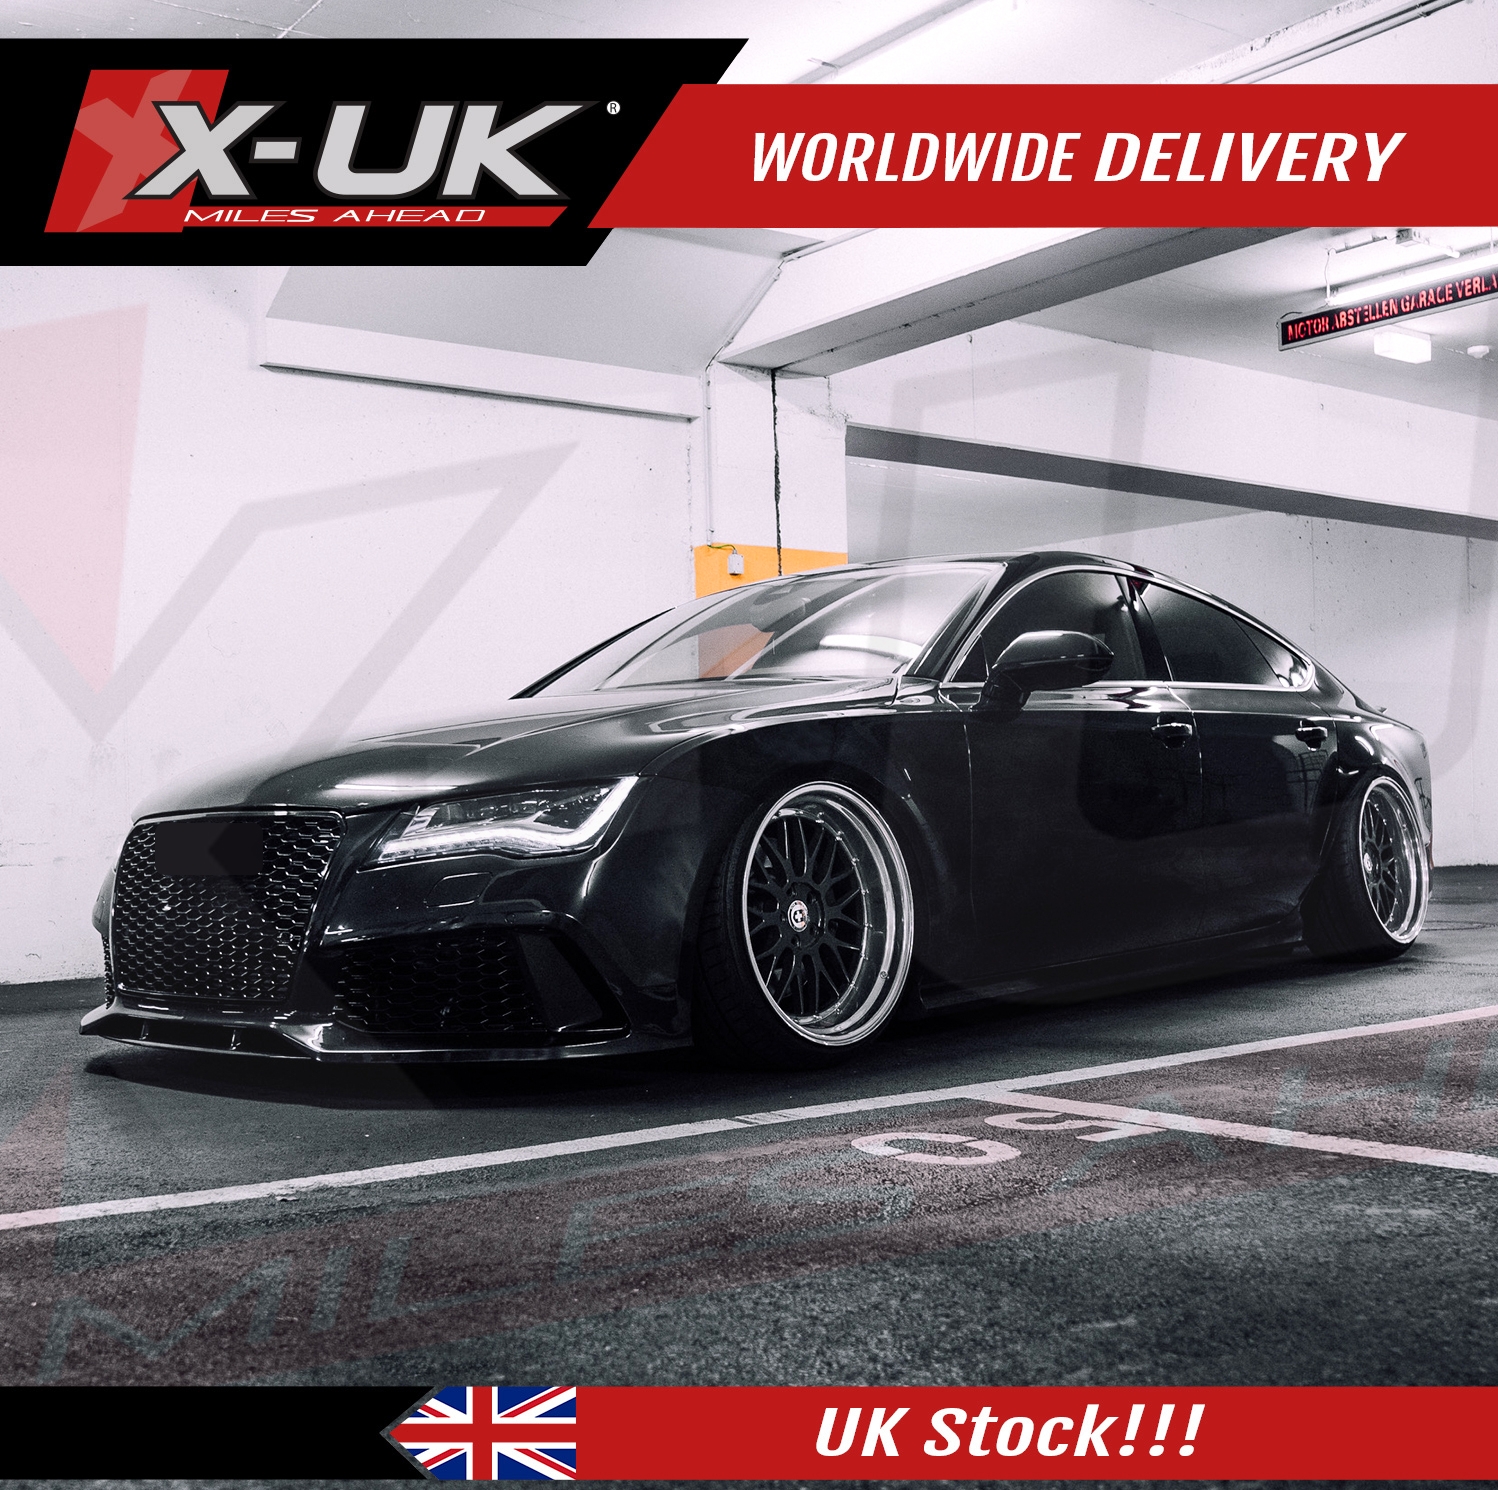 Audi Rs7 Style Front Bumper Upgrade For Audi A7 S7 Rs7 2011-2014 Pre Facelift – With A Front Grill – X-UK Ltd